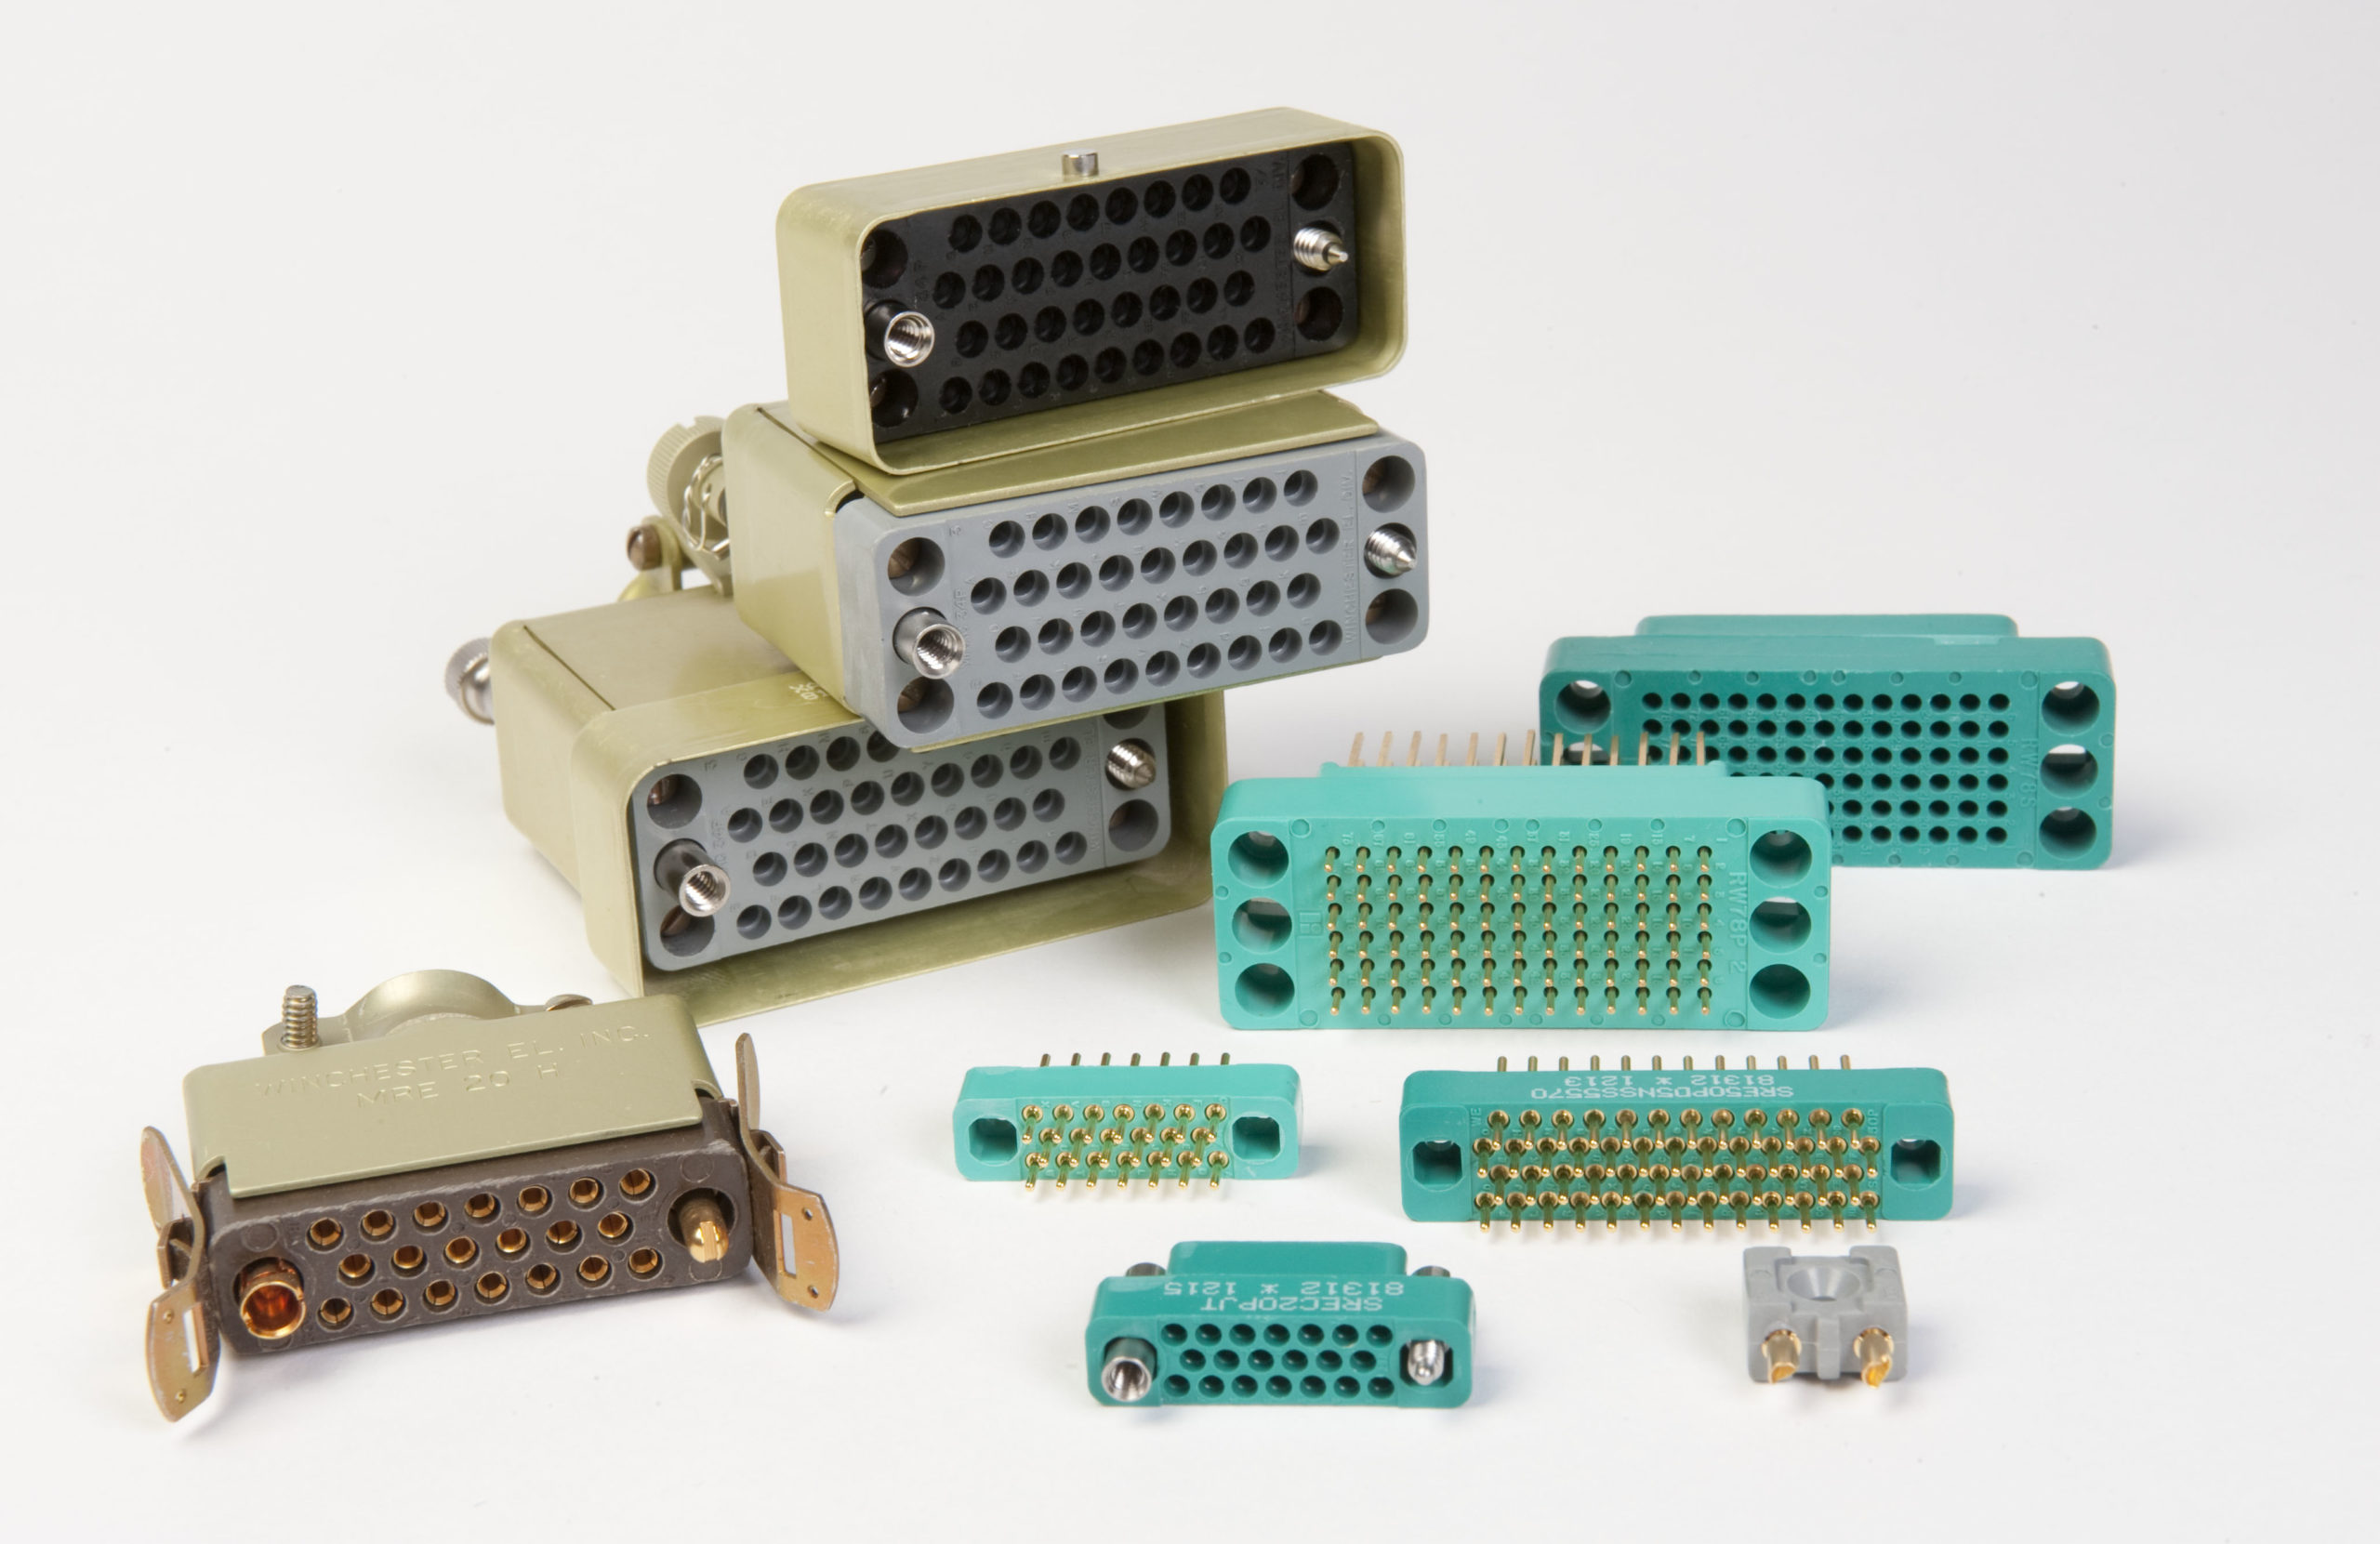 Rectangular I/O connectors from Winchester and CDM